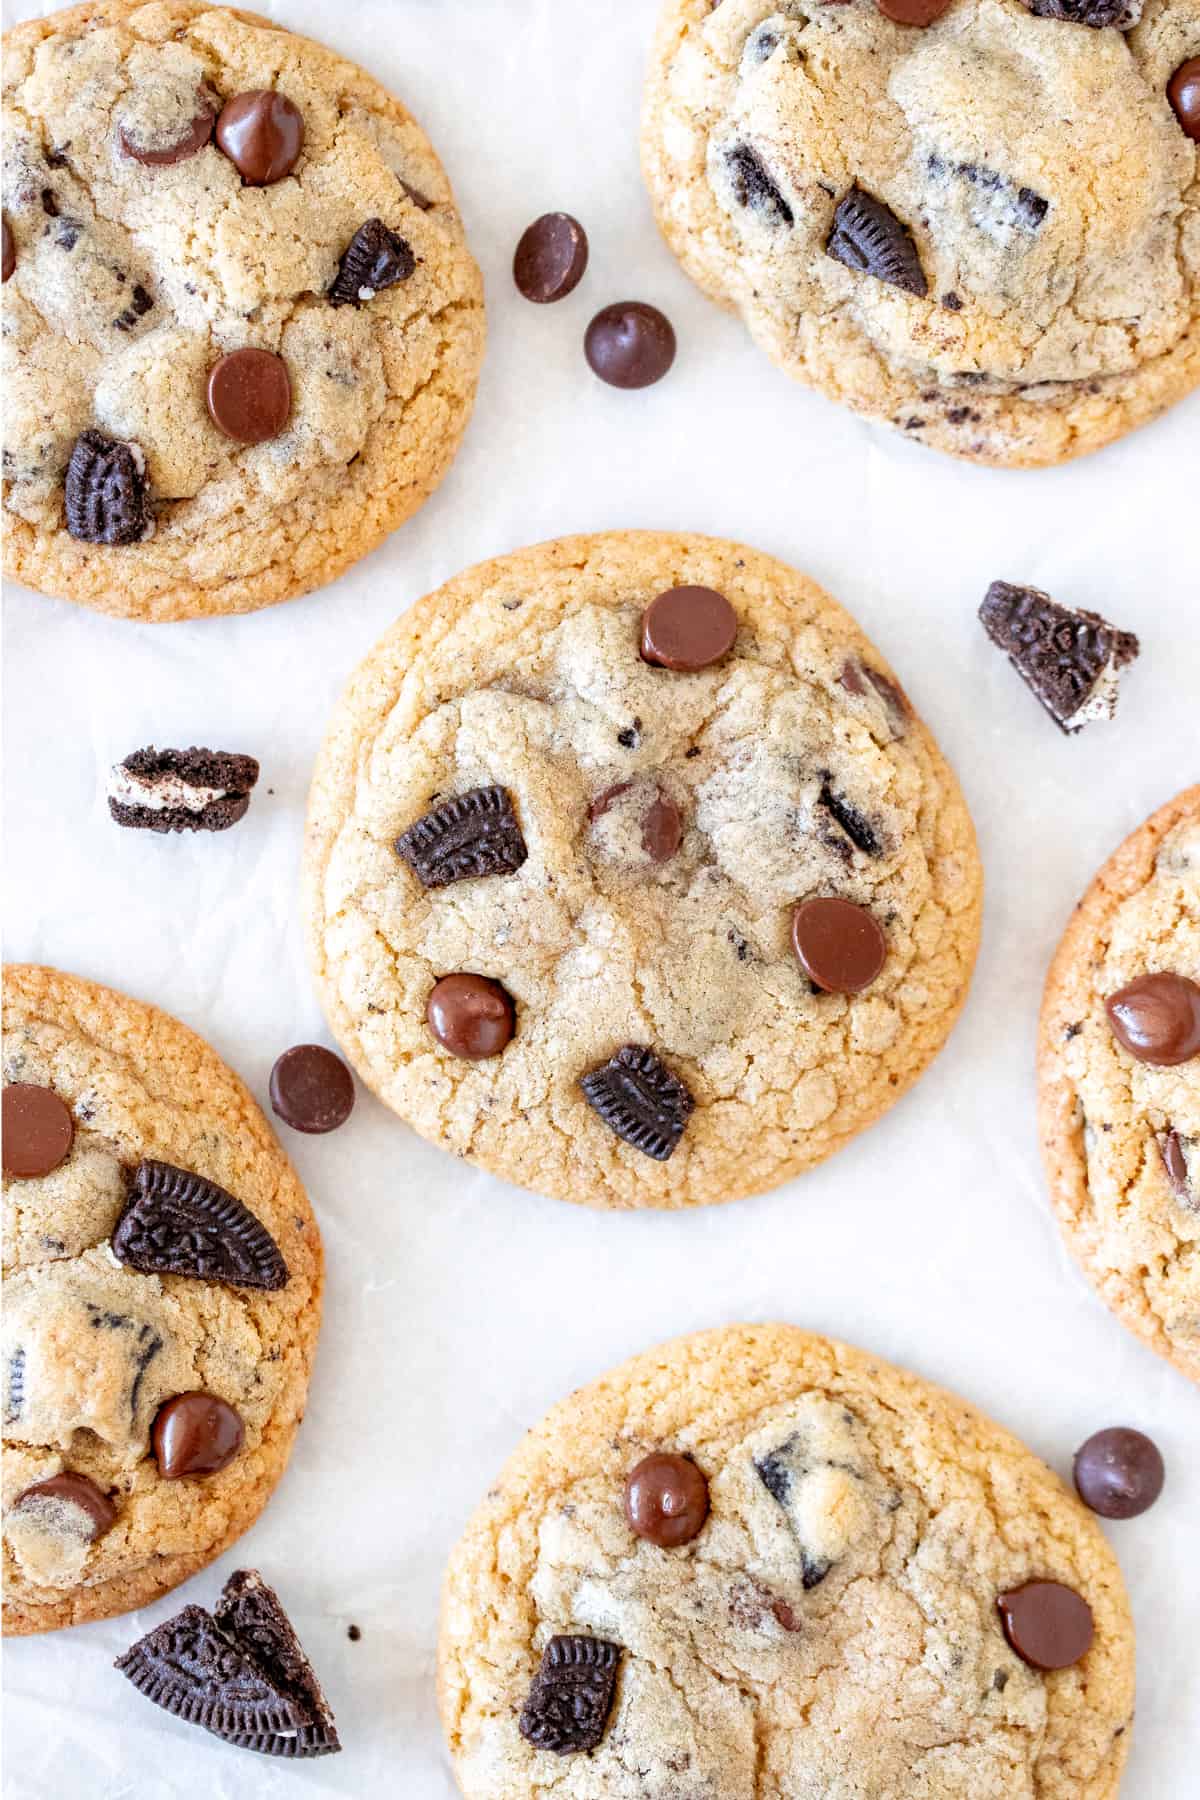 Oreo chocolate chip cookies, from above